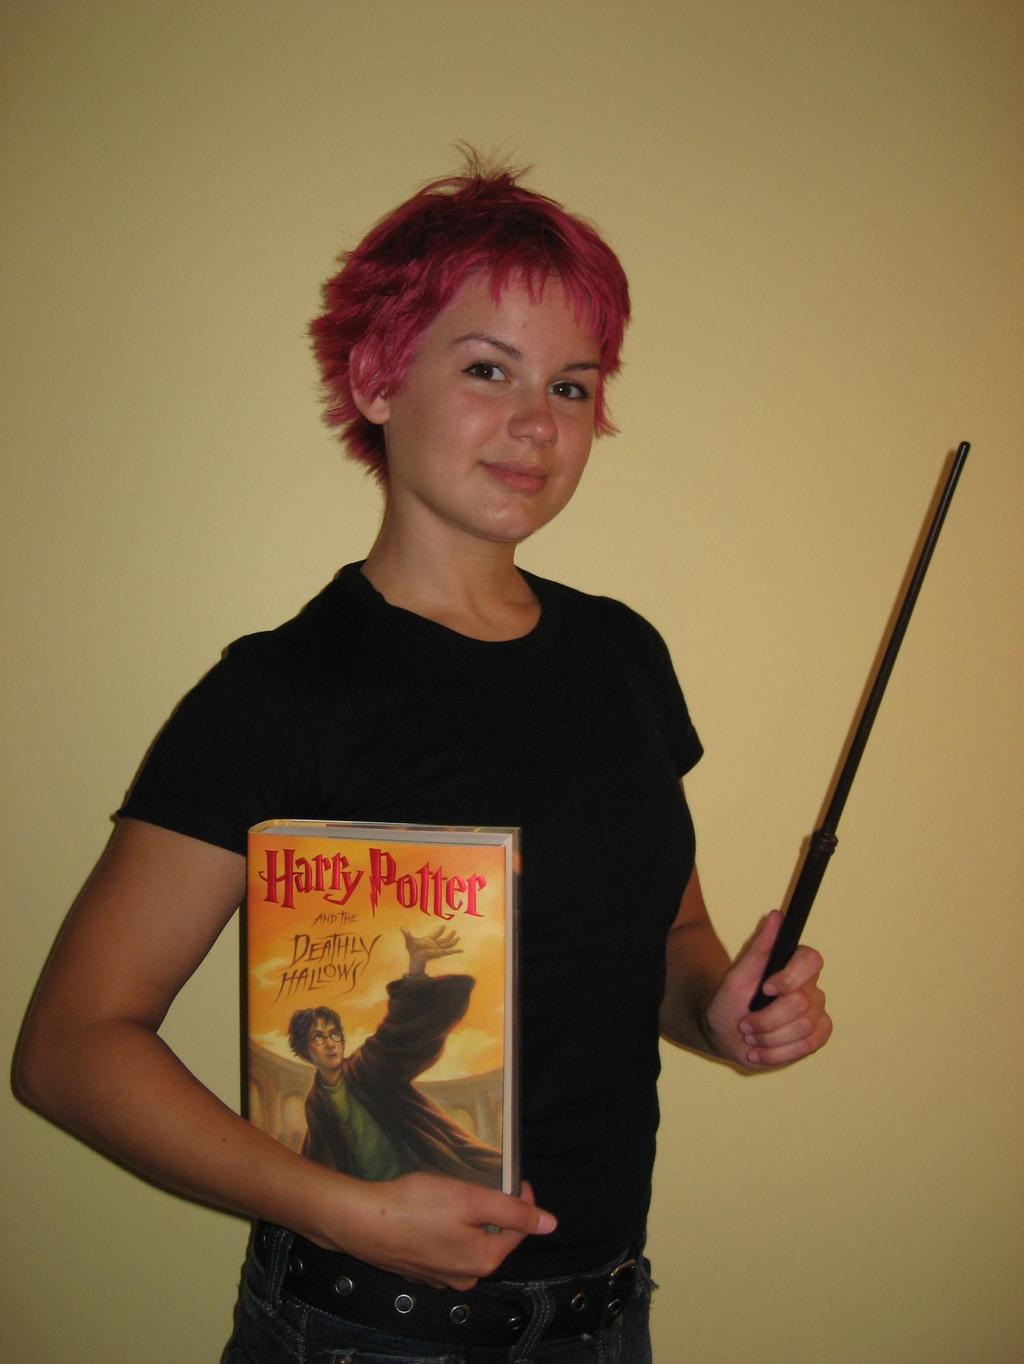 Rowlings, J.K. Harry Potter and the Deathly Hallows.